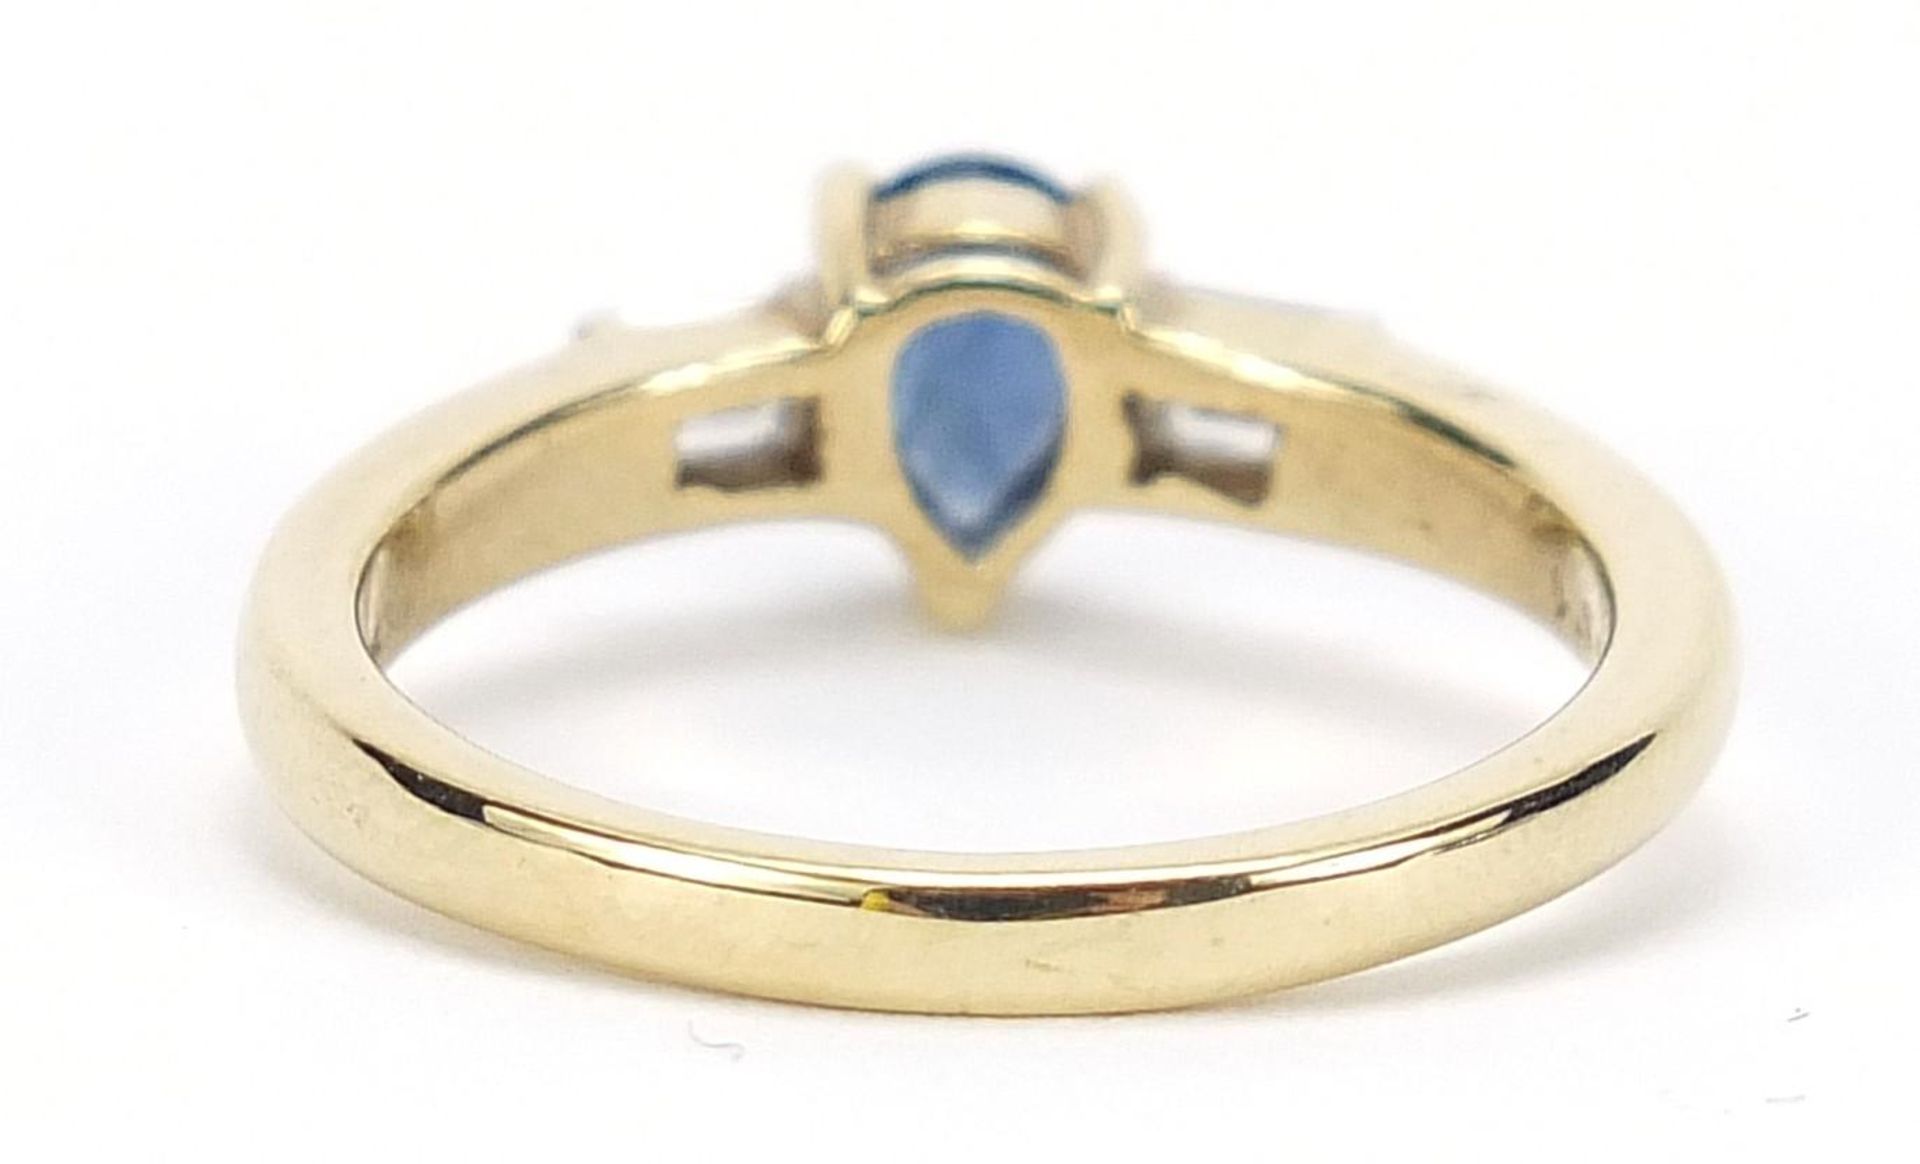 9ct gold pear cut sapphire ring with baguette cut diamond shoulders, size M, 2.9g : - Image 3 of 5